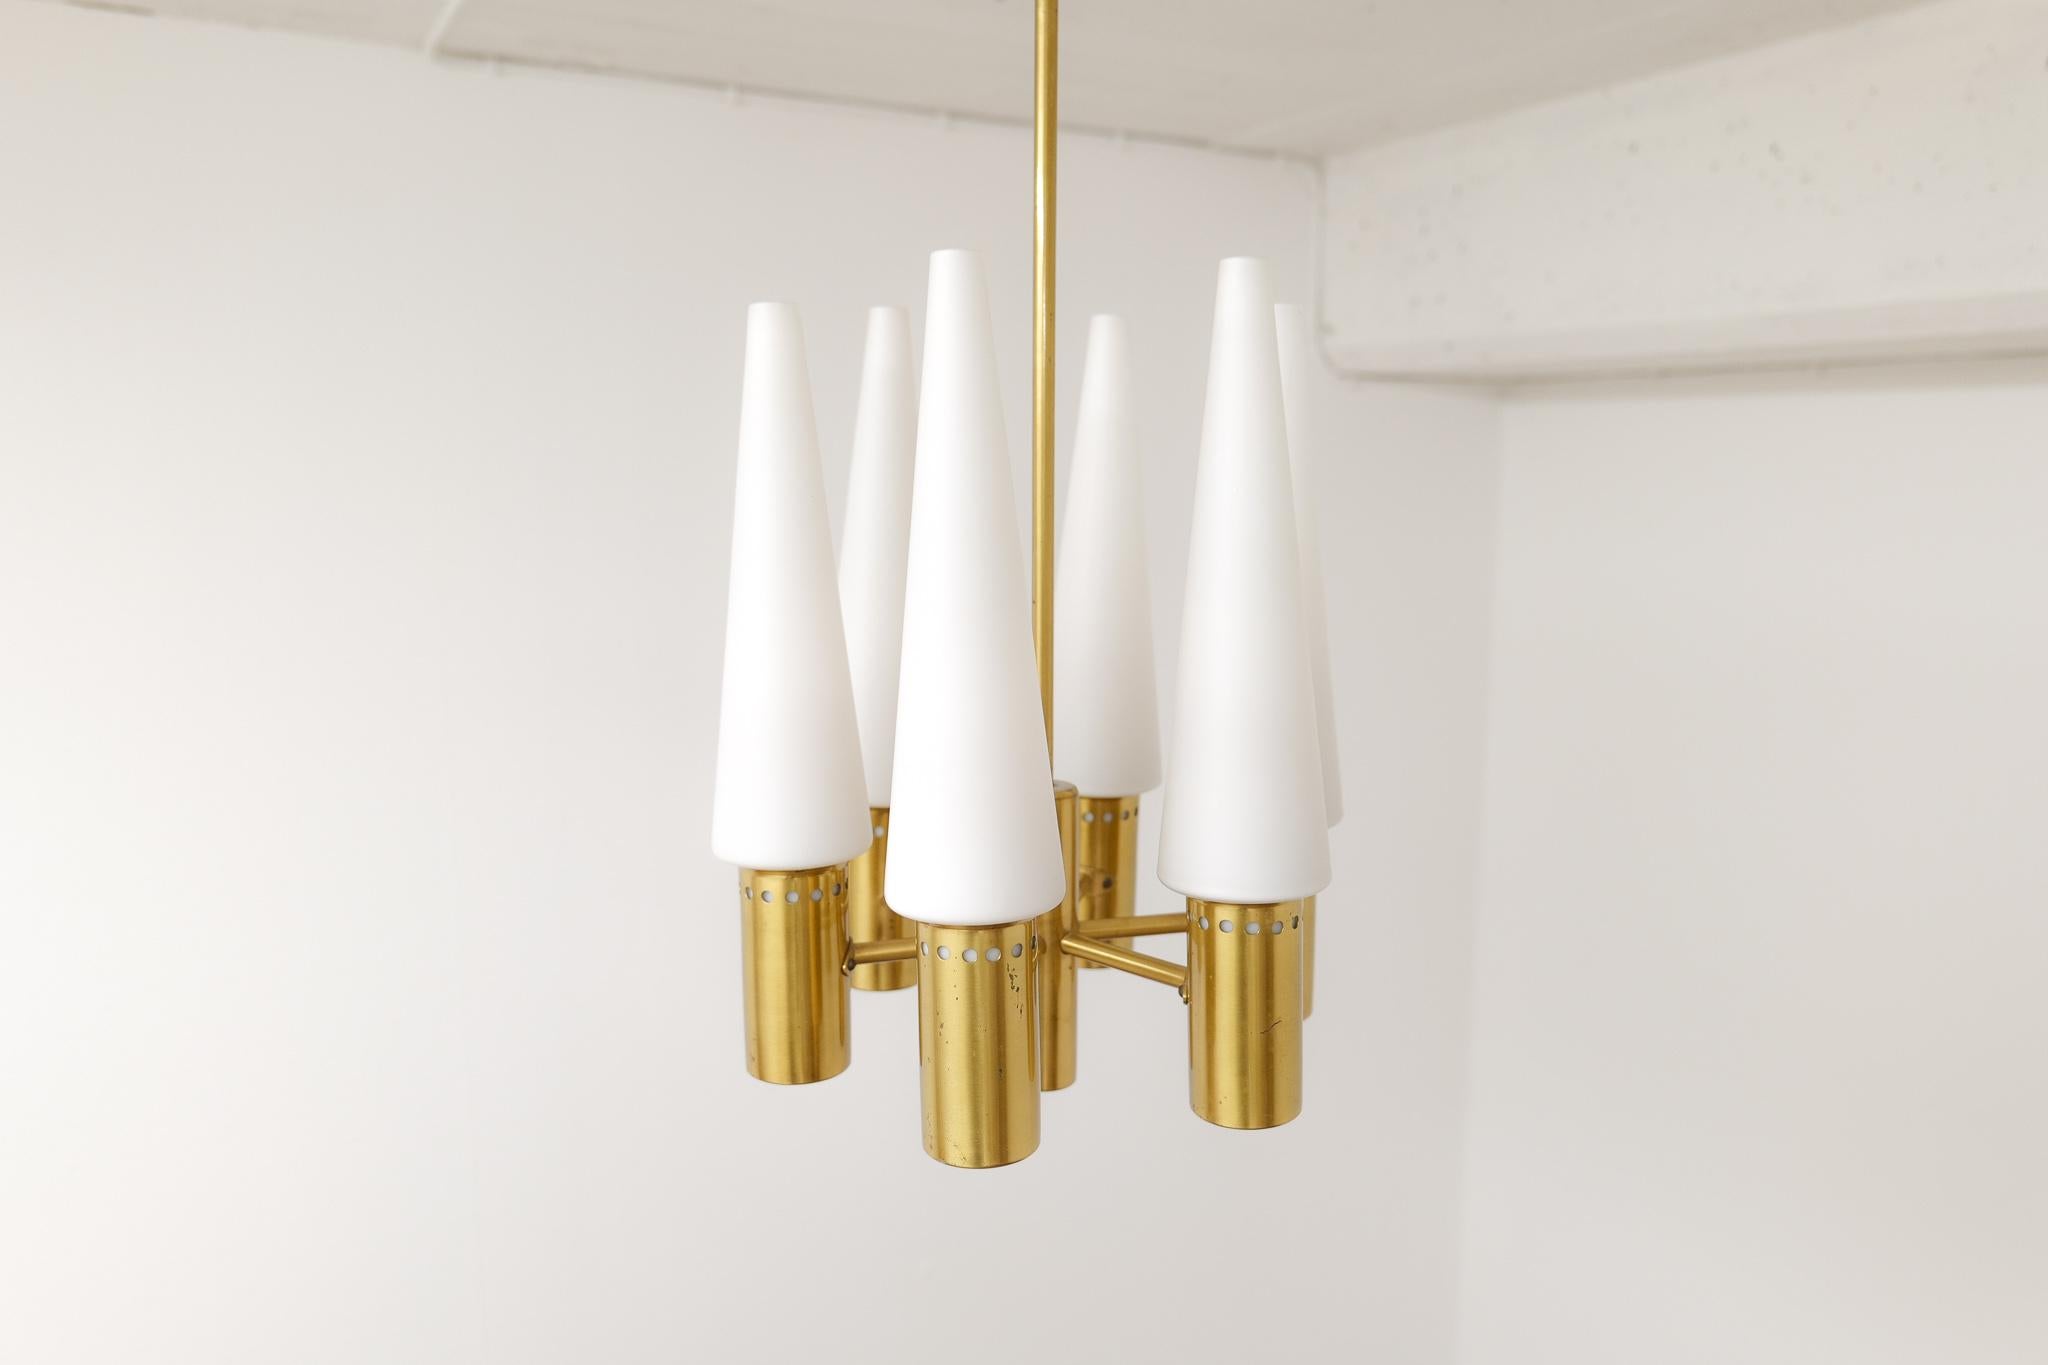 Midcentury Hans-Agne Jakobsson Brass and Opaline Ceiling Lamp, Sweden, 1950s For Sale 3